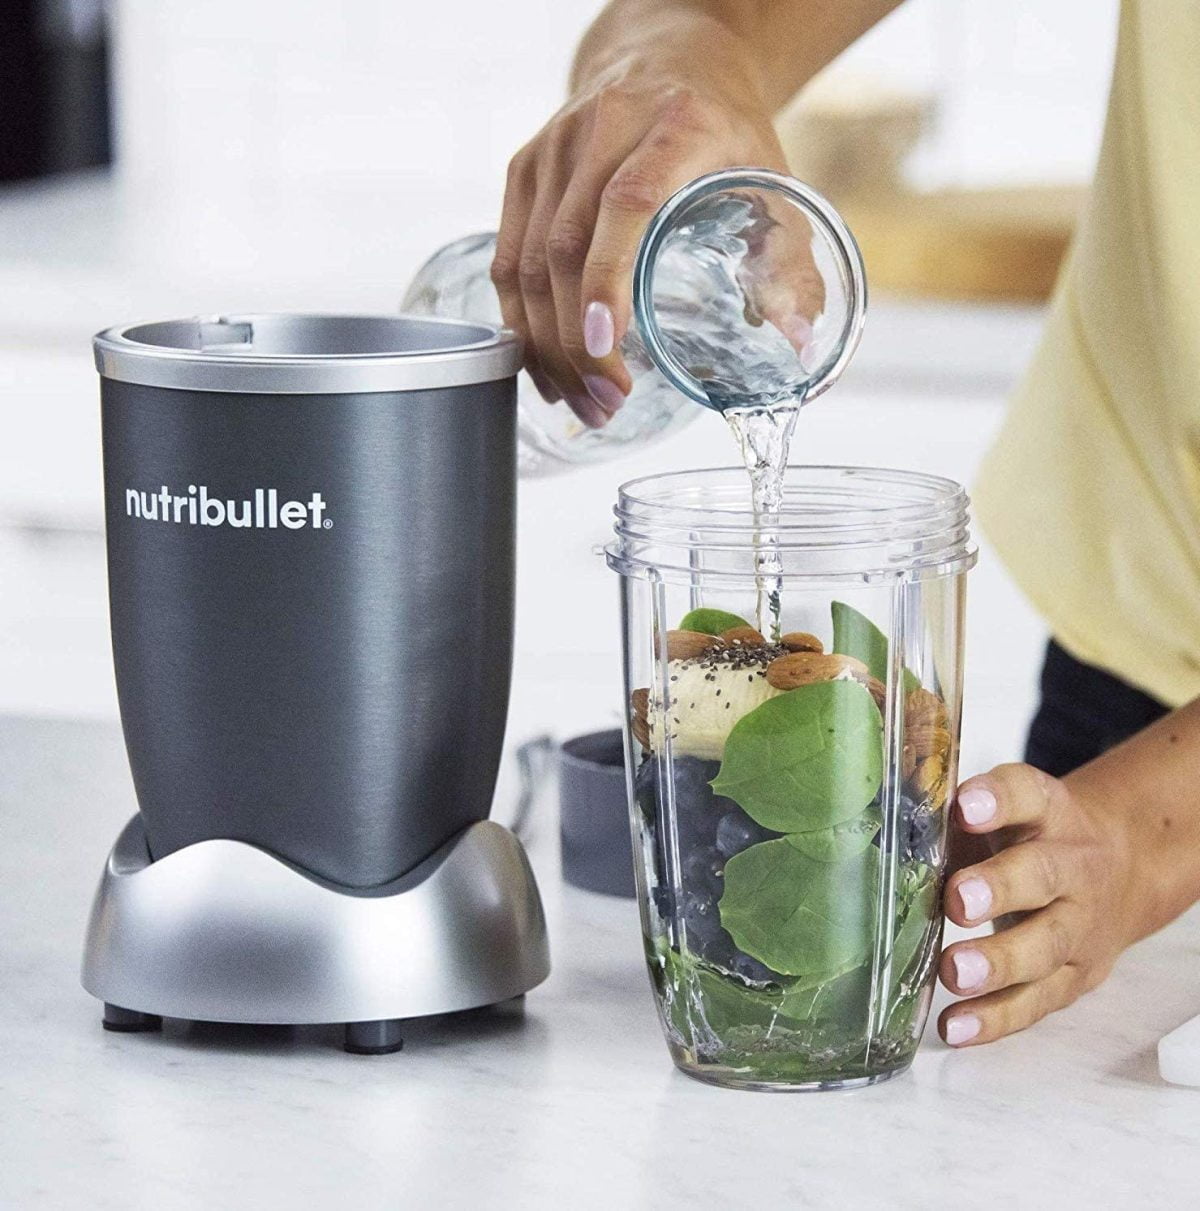 81Rjehjupol. Ac Sl1492 Nutribullet &Lt;Ul Class=&Quot;A-Unordered-List A-Vertical A-Spacing-Mini&Quot;&Gt; &Lt;Li&Gt;&Lt;Span Class=&Quot;A-List-Item&Quot;&Gt;Meet The Most Popular Nutribullet, Our Compact-Yet-Powerful Personal Blender. You Choose What Goes In To Get The Most Out Of Every Ingredient, Every Day.&Lt;/Span&Gt;&Lt;/Li&Gt; &Lt;Li&Gt;&Lt;Span Class=&Quot;A-List-Item&Quot;&Gt;The Nutribullet Is The Fastest, Easiest Solution For Making Nutrient-Packed Smoothies. Load It Up With Your Favorite Whole Foods Like Nuts, Berries, And Spinach, Then Push, Twist, And Blend Your Way To A Healthier Lifestyle.&Lt;/Span&Gt;&Lt;/Li&Gt; &Lt;Li&Gt;&Lt;Span Class=&Quot;A-List-Item&Quot;&Gt;Powerful 600-Watt Motor And Refined Nutrient-Extraction Blades Blend Whole Foods Into Liquid Fuel For Your Body - In Seconds.&Lt;/Span&Gt;&Lt;/Li&Gt; &Lt;Li&Gt;&Lt;Span Class=&Quot;A-List-Item&Quot;&Gt;Hassle-Free Cleaning - Simply Twist Off The Blade, Rinse With Soap And Water, And Put The Cups In The Top Rack Of The Dishwasher.&Lt;/Span&Gt;&Lt;/Li&Gt; &Lt;Li&Gt;&Lt;Span Class=&Quot;A-List-Item&Quot;&Gt;What You Get: (1) 600 Watt Motor Base, (1) Extractor Blade, (1) 700Ml Cup, (1) 500Ml Cup, (1) Lip Ring With Handle, (1) Solid Lid, (1) User Guide, (1) Recipe Book. 2 Years Brand Warranty&Lt;/Span&Gt;&Lt;/Li&Gt; &Lt;/Ul&Gt; Nutribullet Nutribullet 600 Watts, 8 Piece Set, Multi-Function High Speed Blender, Mixer System With Nutrient Extractor, Smoothie Maker, Gray